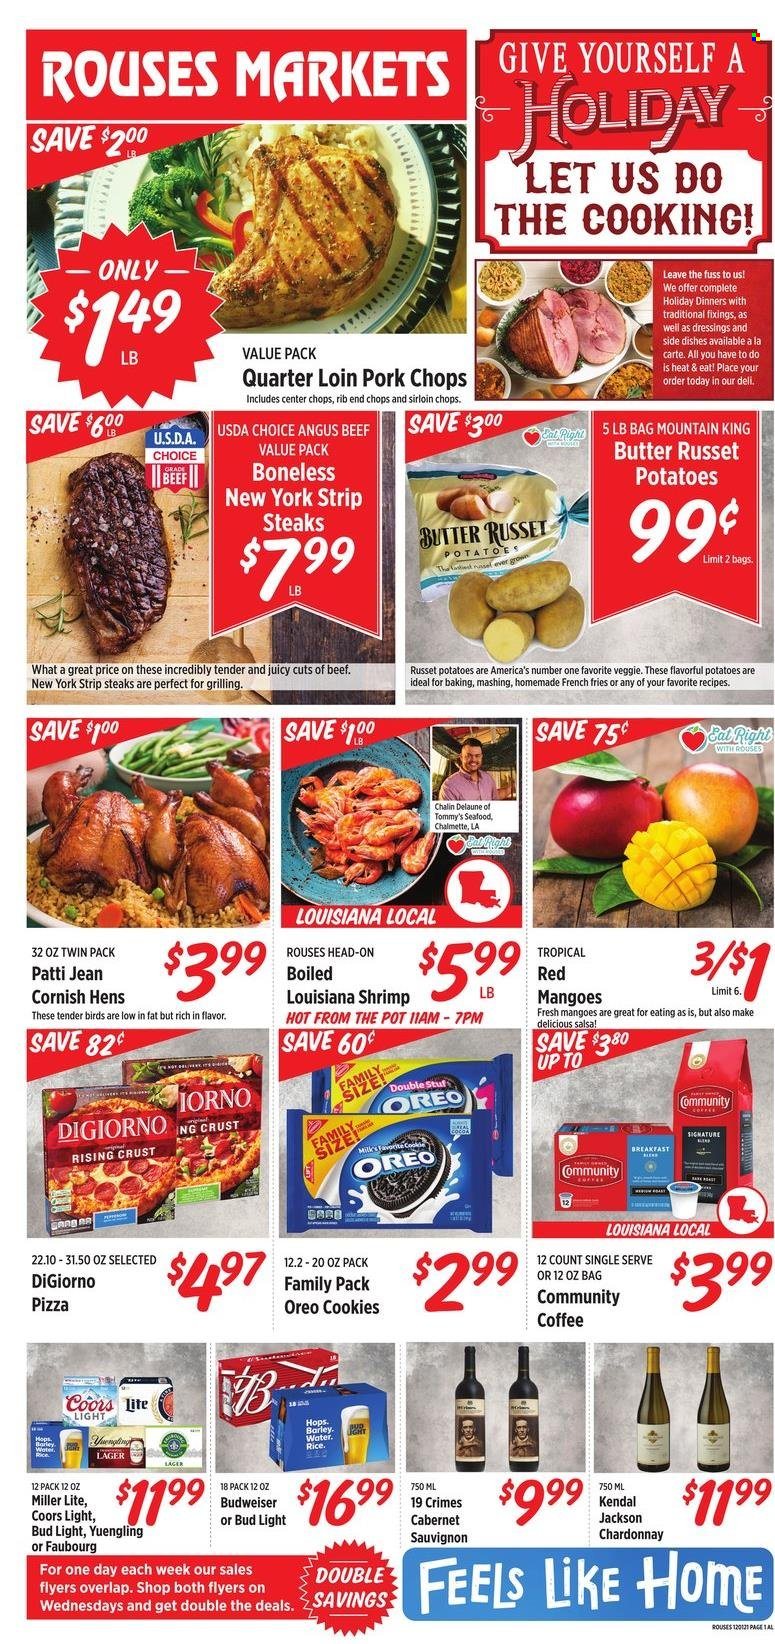 thumbnail - Rouses Markets Flyer - 12/01/2021 - 12/08/2021 - Sales products - russet potatoes, potatoes, mango, seafood, shrimps, pizza, Oreo, milk, butter, potato fries, french fries, cookies, rice, salsa, coffee, Cabernet Sauvignon, white wine, Chardonnay, wine, beer, Bud Light, Lager, beef meat, steak, striploin steak, pork chops, pork meat, pot, Budweiser, Miller Lite, Coors, Yuengling. Page 1.